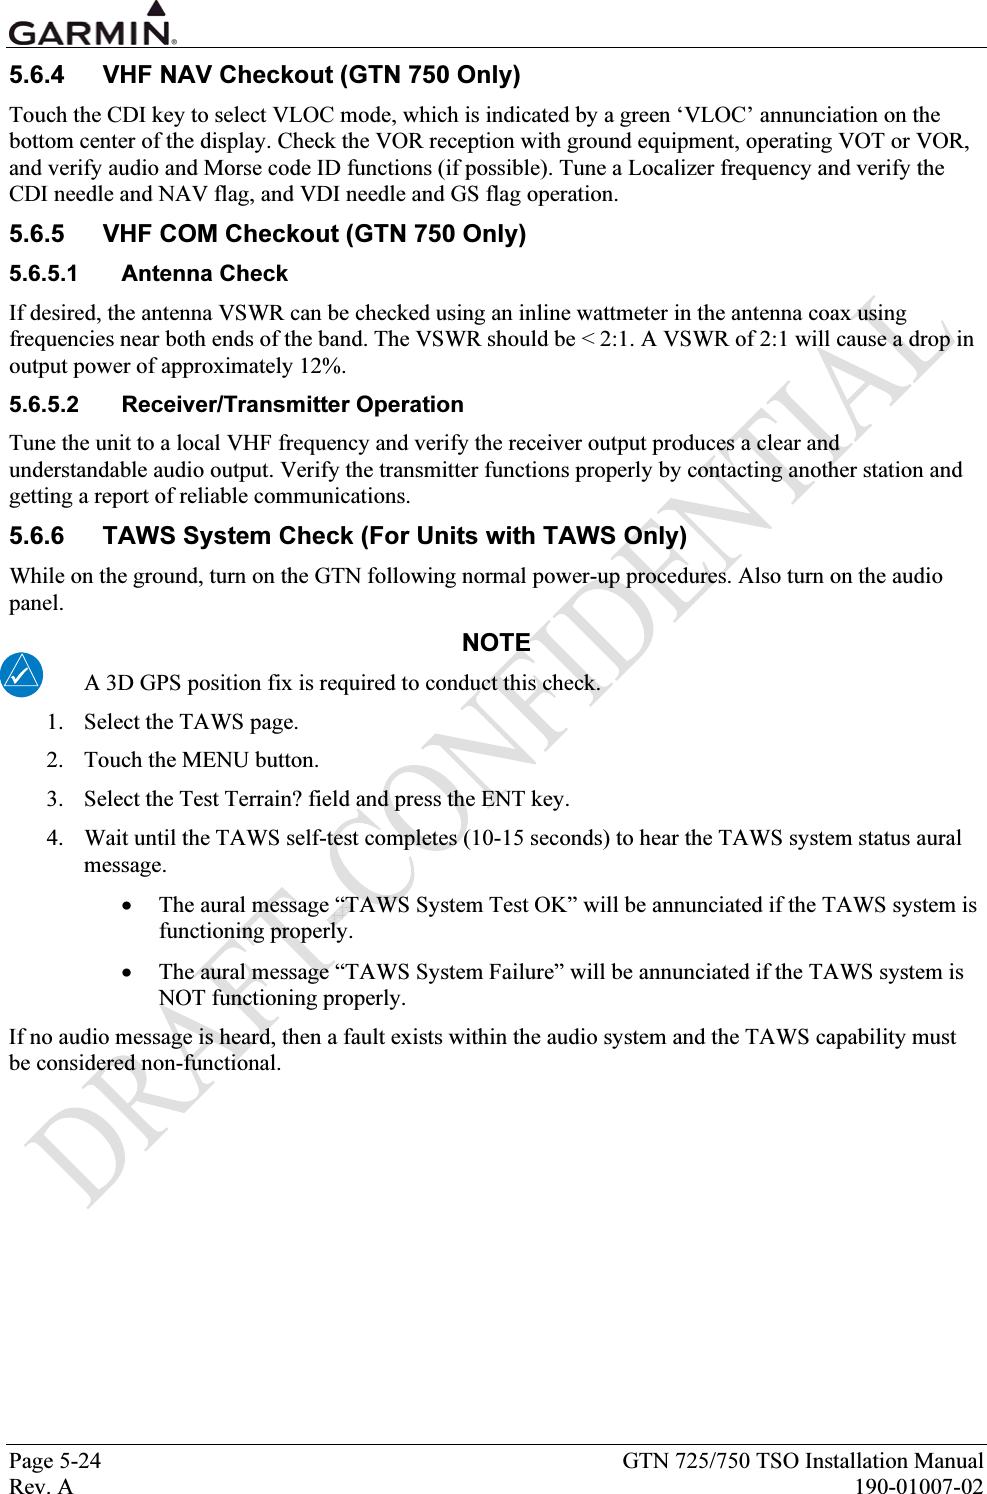  Page 5-24  GTN 725/750 TSO Installation Manual Rev. A  190-01007-02 5.6.4  VHF NAV Checkout (GTN 750 Only) Touch the CDI key to select VLOC mode, which is indicated by a green ‘VLOC’ annunciation on the bottom center of the display. Check the VOR reception with ground equipment, operating VOT or VOR, and verify audio and Morse code ID functions (if possible). Tune a Localizer frequency and verify the CDI needle and NAV flag, and VDI needle and GS flag operation. 5.6.5  VHF COM Checkout (GTN 750 Only) 5.6.5.1 Antenna Check If desired, the antenna VSWR can be checked using an inline wattmeter in the antenna coax using frequencies near both ends of the band. The VSWR should be &lt; 2:1. A VSWR of 2:1 will cause a drop in output power of approximately 12%. 5.6.5.2 Receiver/Transmitter Operation Tune the unit to a local VHF frequency and verify the receiver output produces a clear and understandable audio output. Verify the transmitter functions properly by contacting another station and getting a report of reliable communications. 5.6.6  TAWS System Check (For Units with TAWS Only) While on the ground, turn on the GTN following normal power-up procedures. Also turn on the audio panel. NOTE A 3D GPS position fix is required to conduct this check. 1. Select the TAWS page. 2. Touch the MENU button. 3. Select the Test Terrain? field and press the ENT key. 4. Wait until the TAWS self-test completes (10-15 seconds) to hear the TAWS system status aural message.   • The aural message “TAWS System Test OK” will be annunciated if the TAWS system is functioning properly.  • The aural message “TAWS System Failure” will be annunciated if the TAWS system is NOT functioning properly.  If no audio message is heard, then a fault exists within the audio system and the TAWS capability must be considered non-functional.  